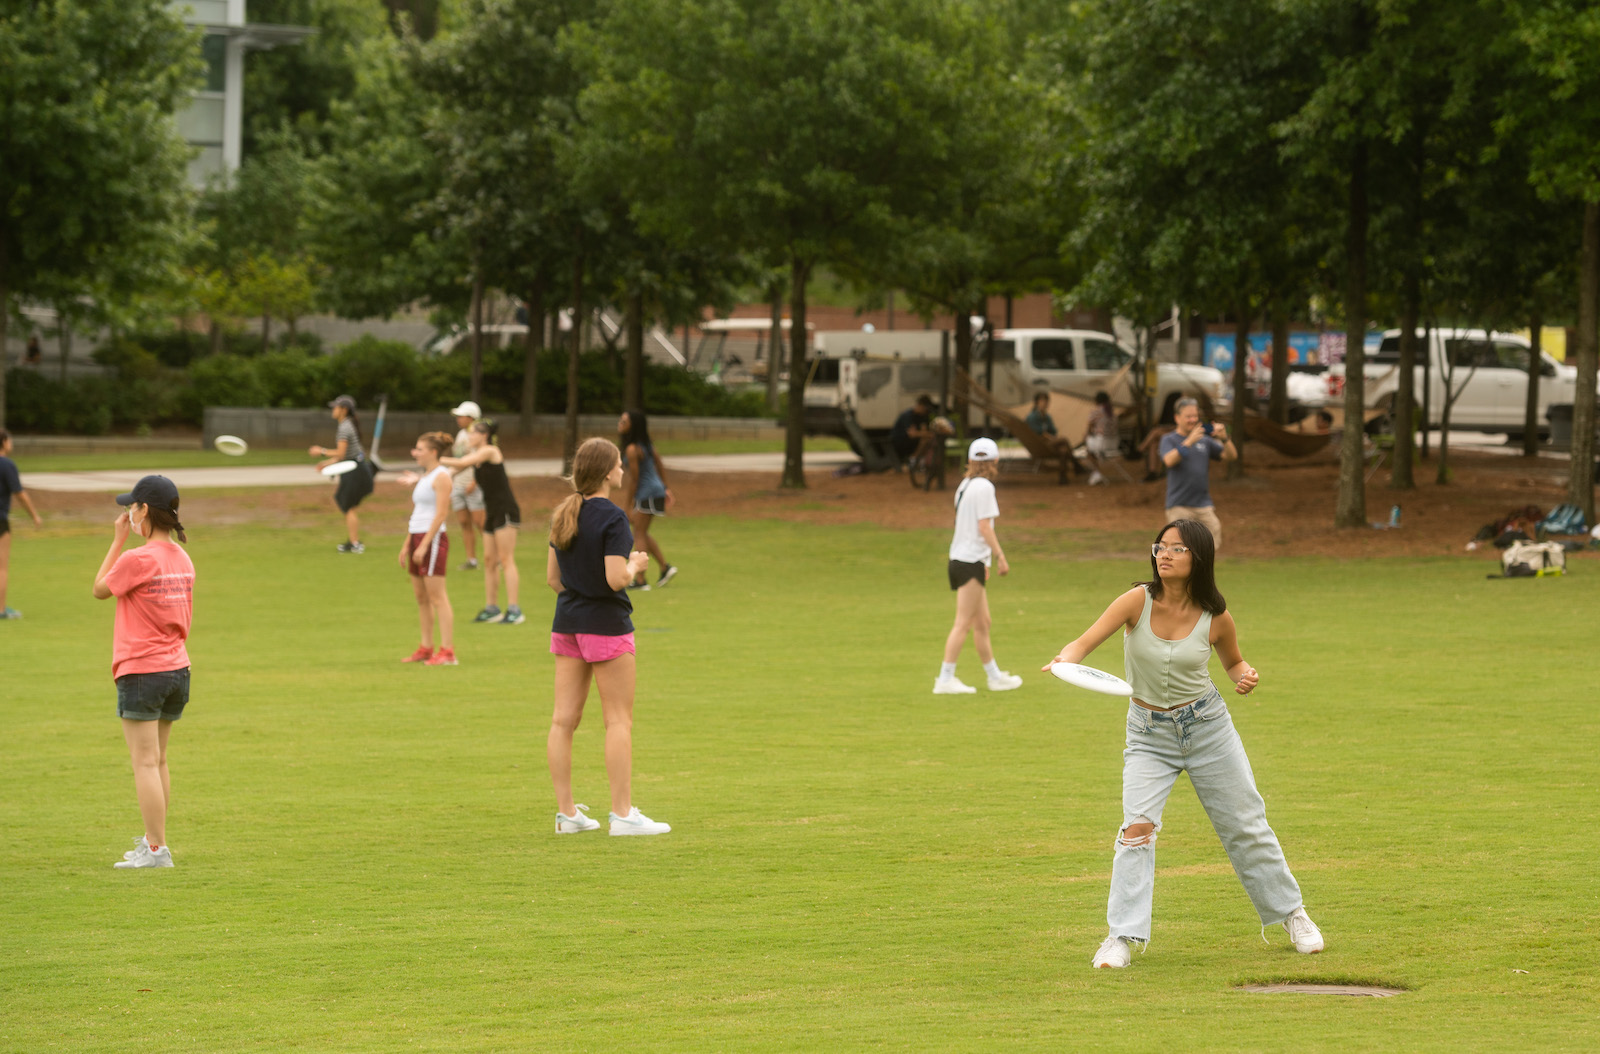 Women's Ultimate Frisbee beginner's throwing event on Tech Lawn. 